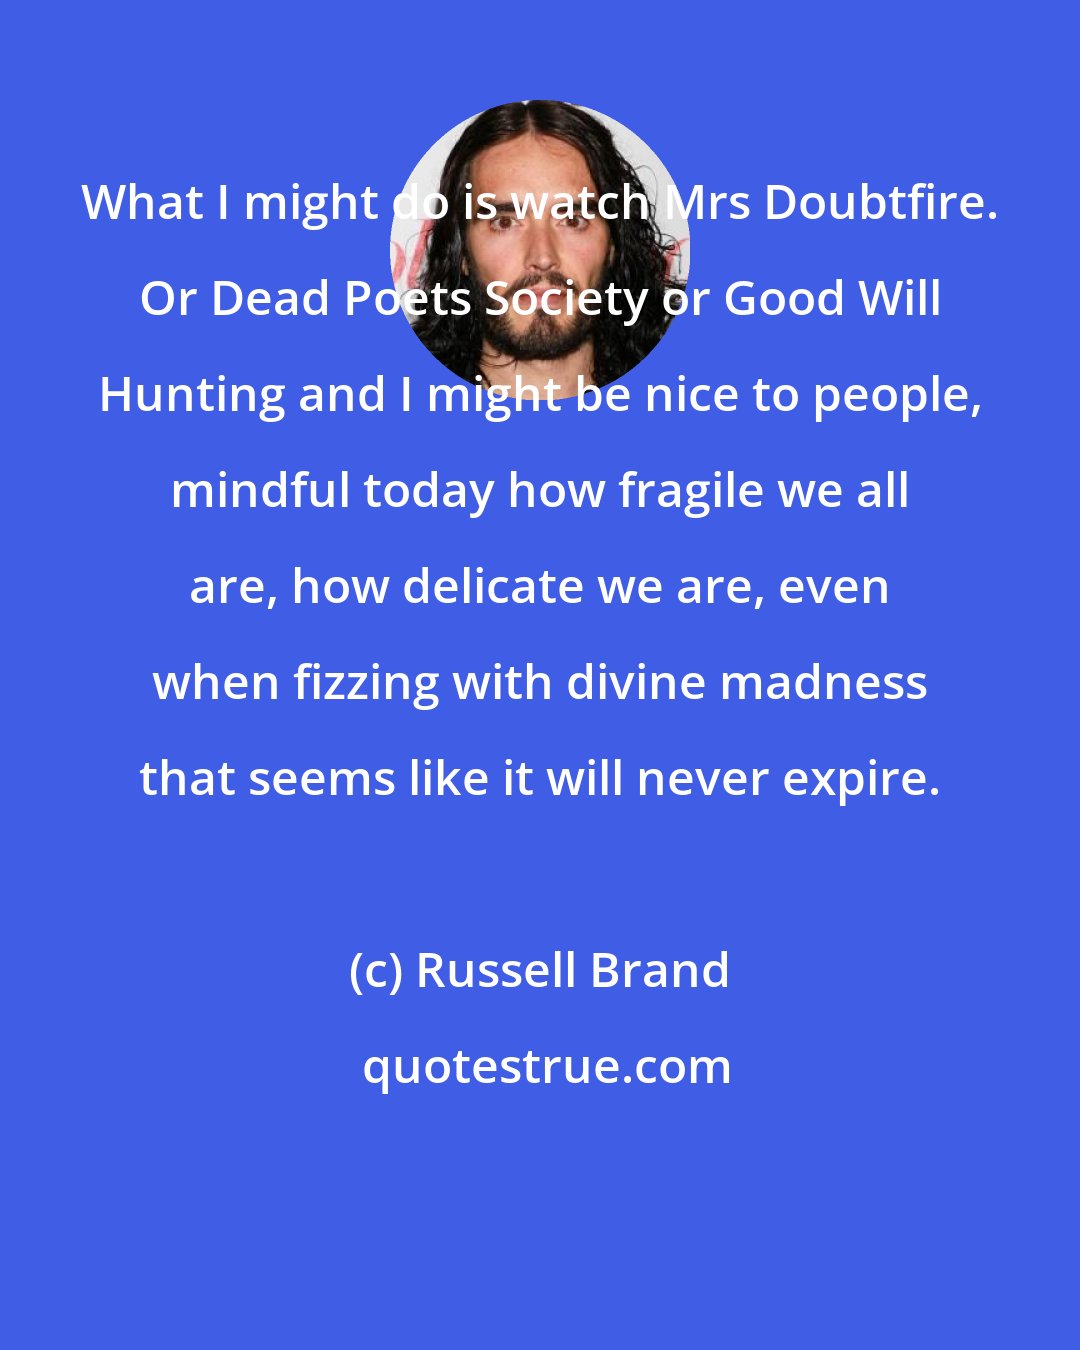 Russell Brand: What I might do is watch Mrs Doubtfire. Or Dead Poets Society or Good Will Hunting and I might be nice to people, mindful today how fragile we all are, how delicate we are, even when fizzing with divine madness that seems like it will never expire.